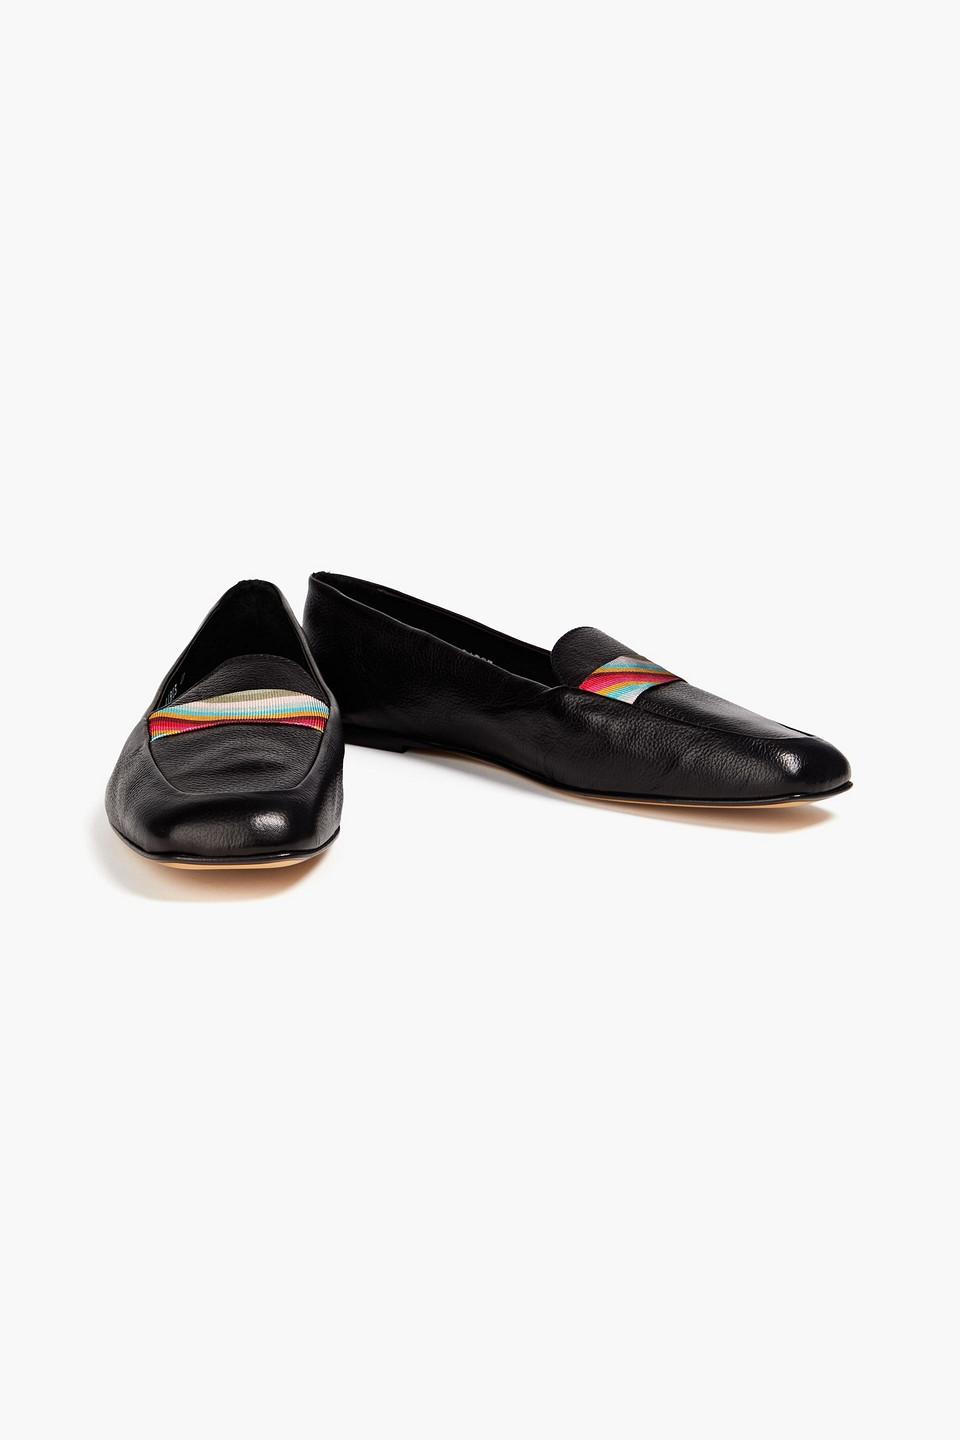 Paul Smith Dionne Textured-leather Loafers in Black | Lyst